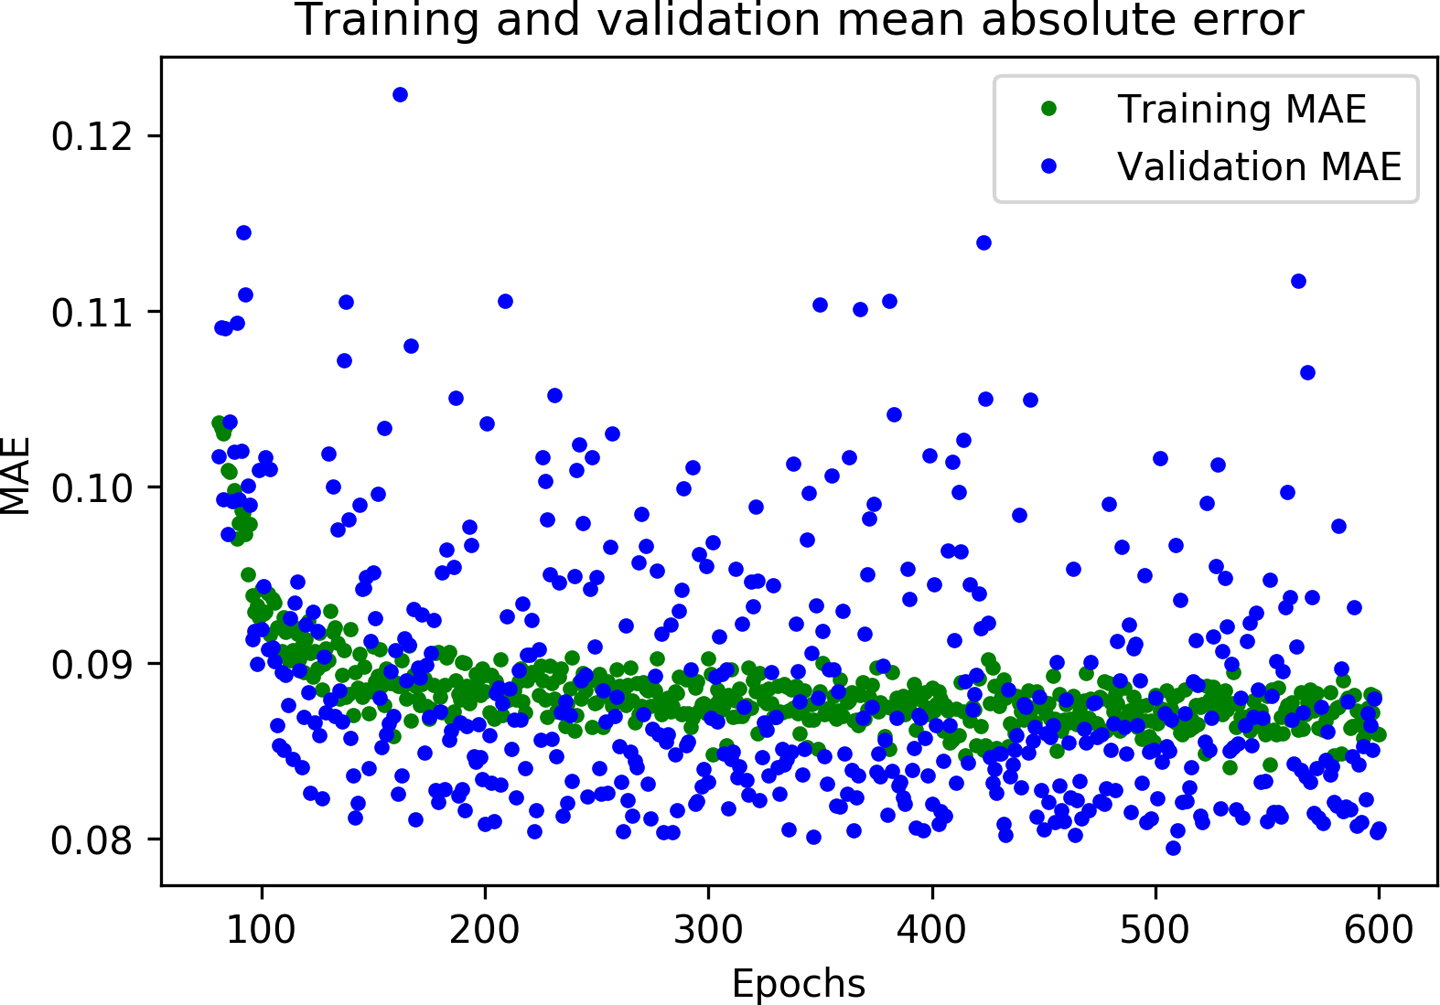 A graph of mean absolute error during training and validation